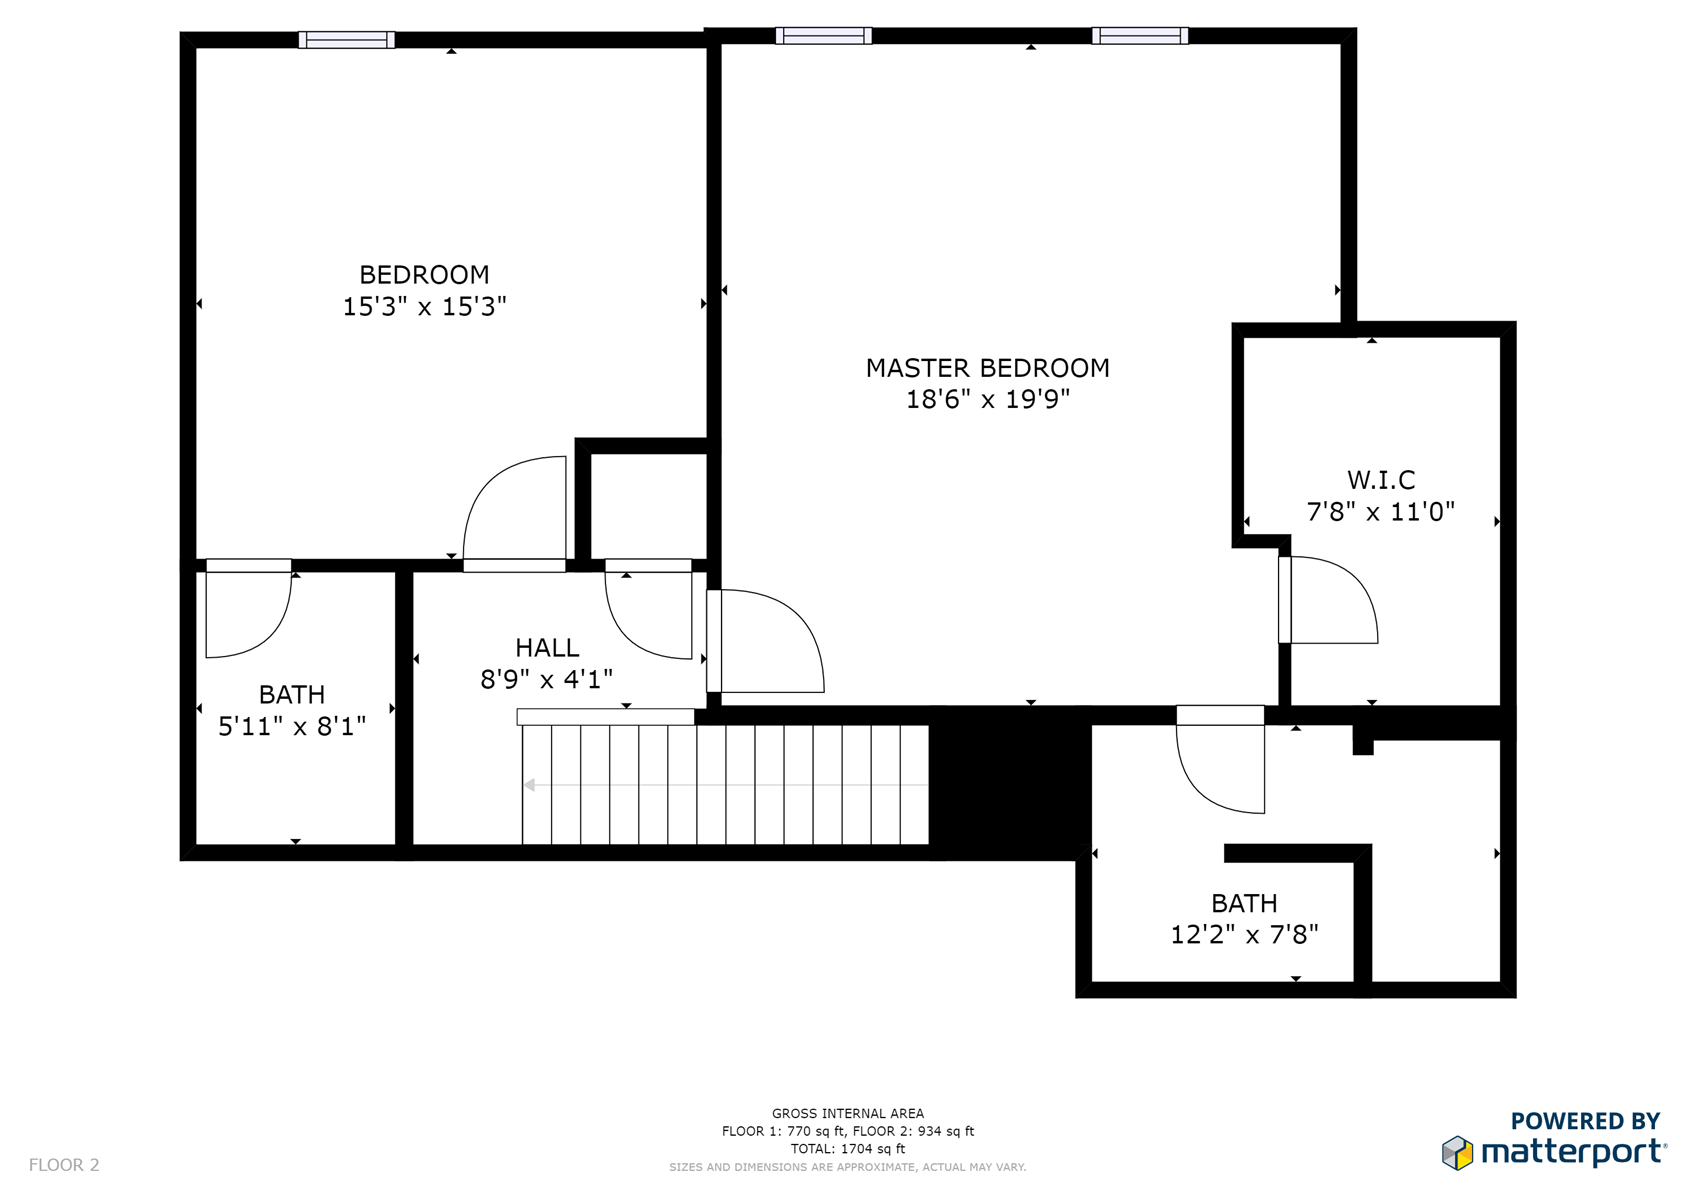 Floor Plan for Water Street Residence B: Located just 400 feet from the Plaza! 